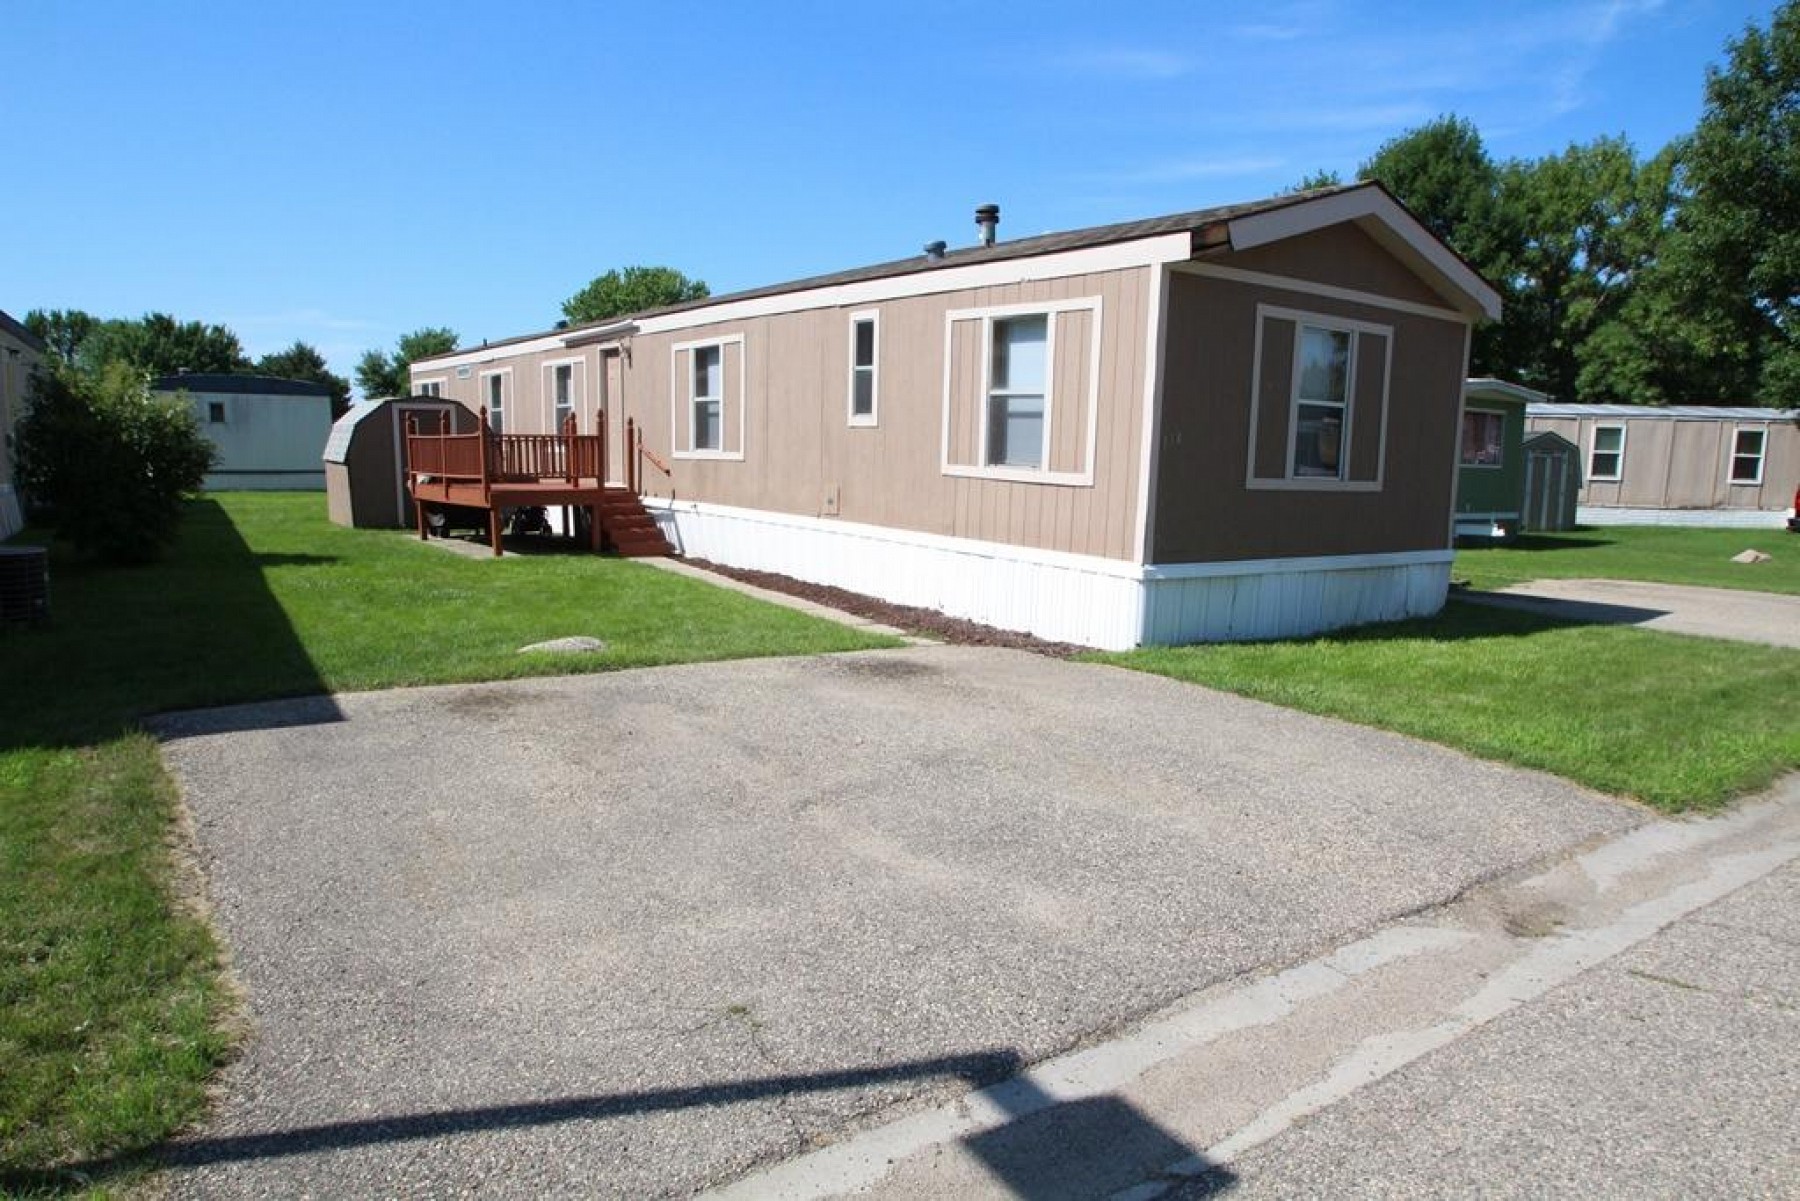 408 3rd Ave. S, Brookings, SD 57006